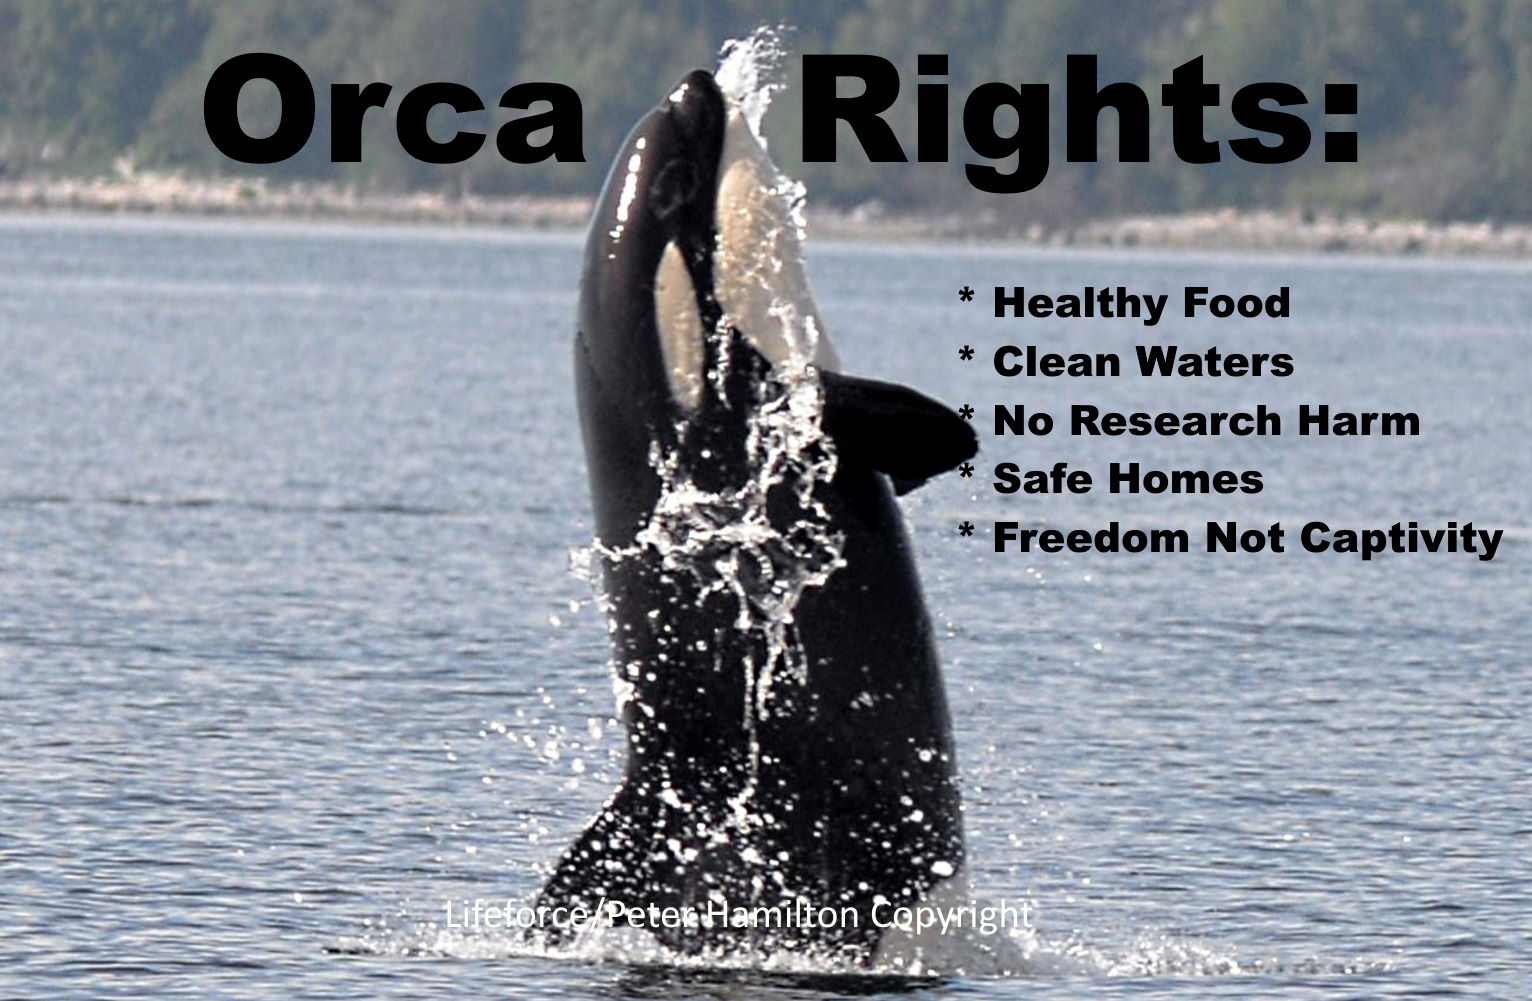 Orca Rights!